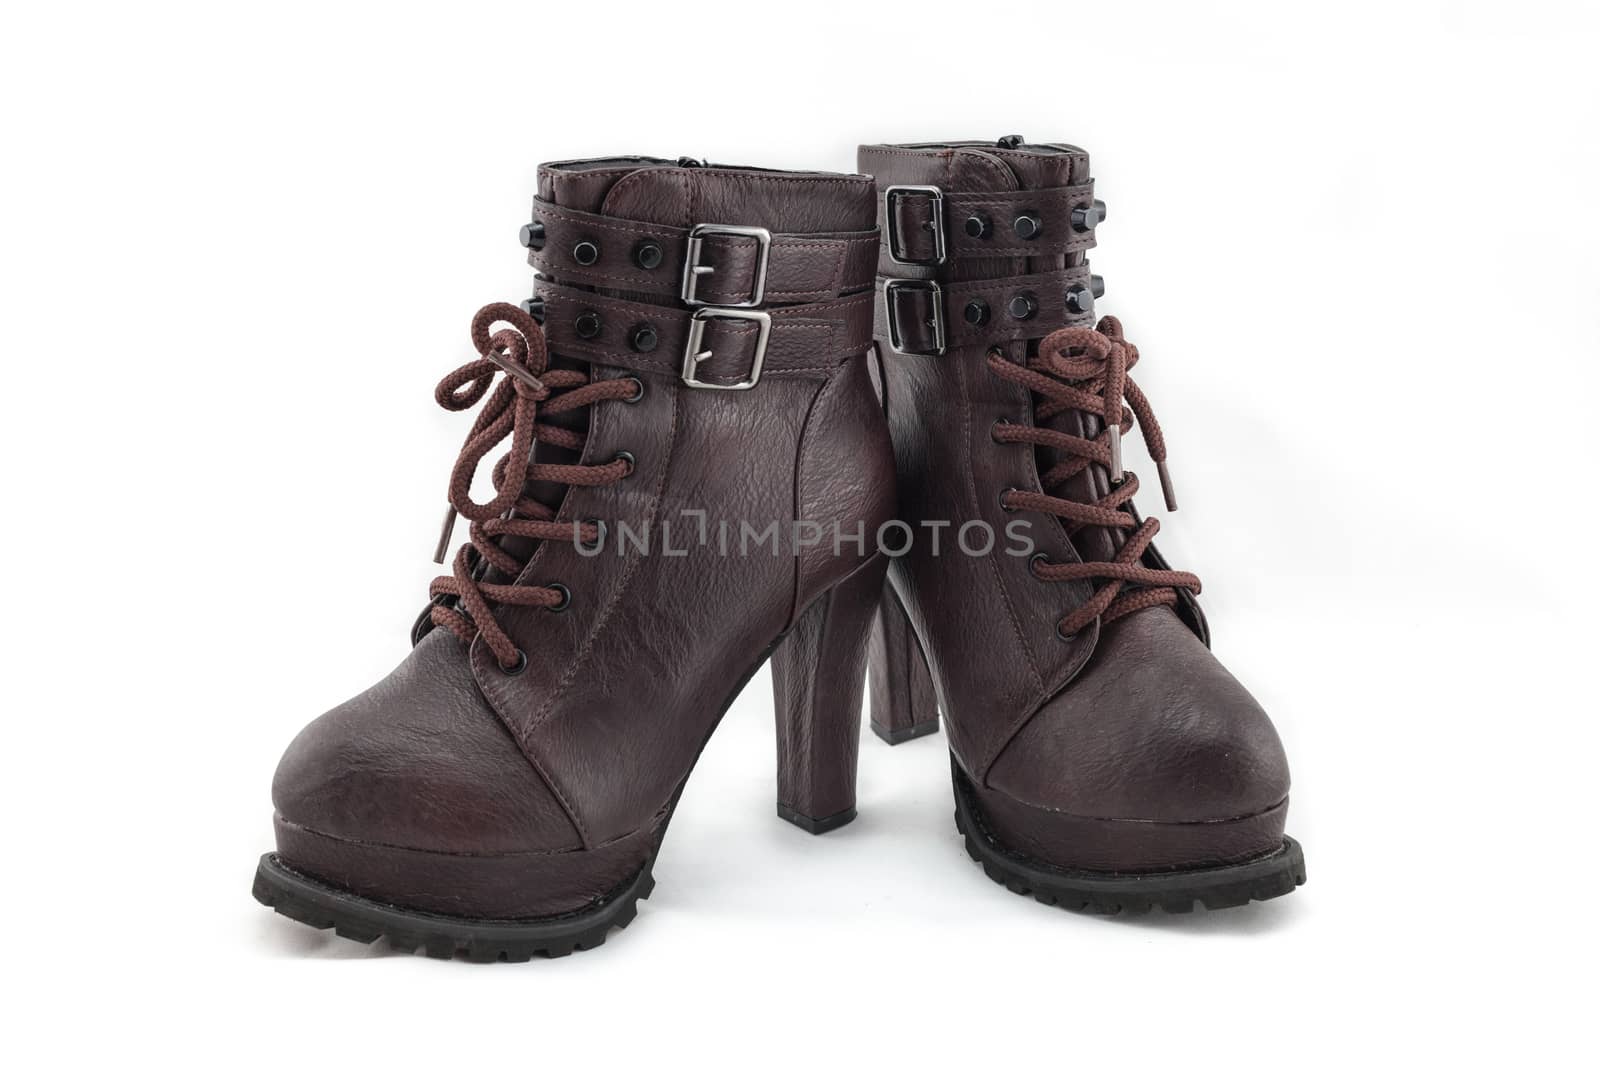 lady leather boot bown with shoelace on white background.